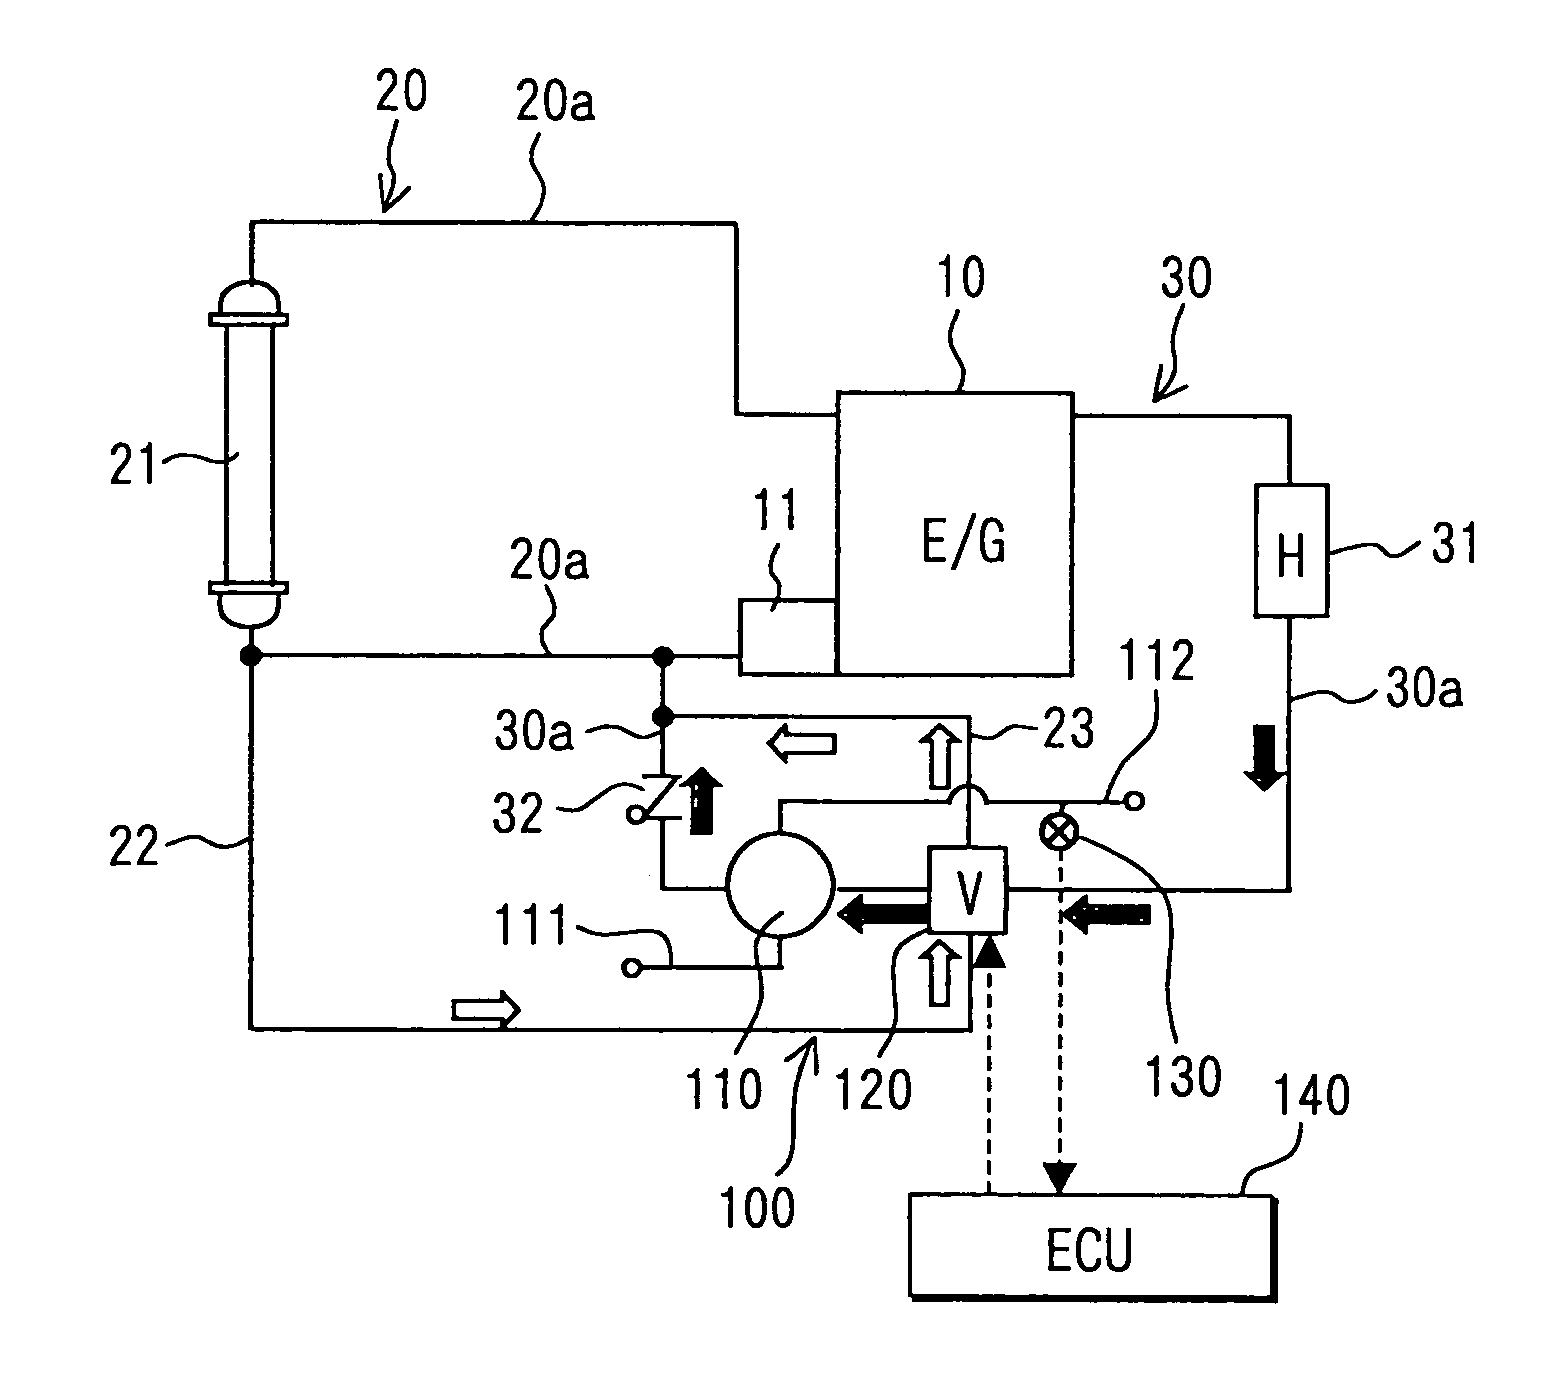 Cooling water circuit system